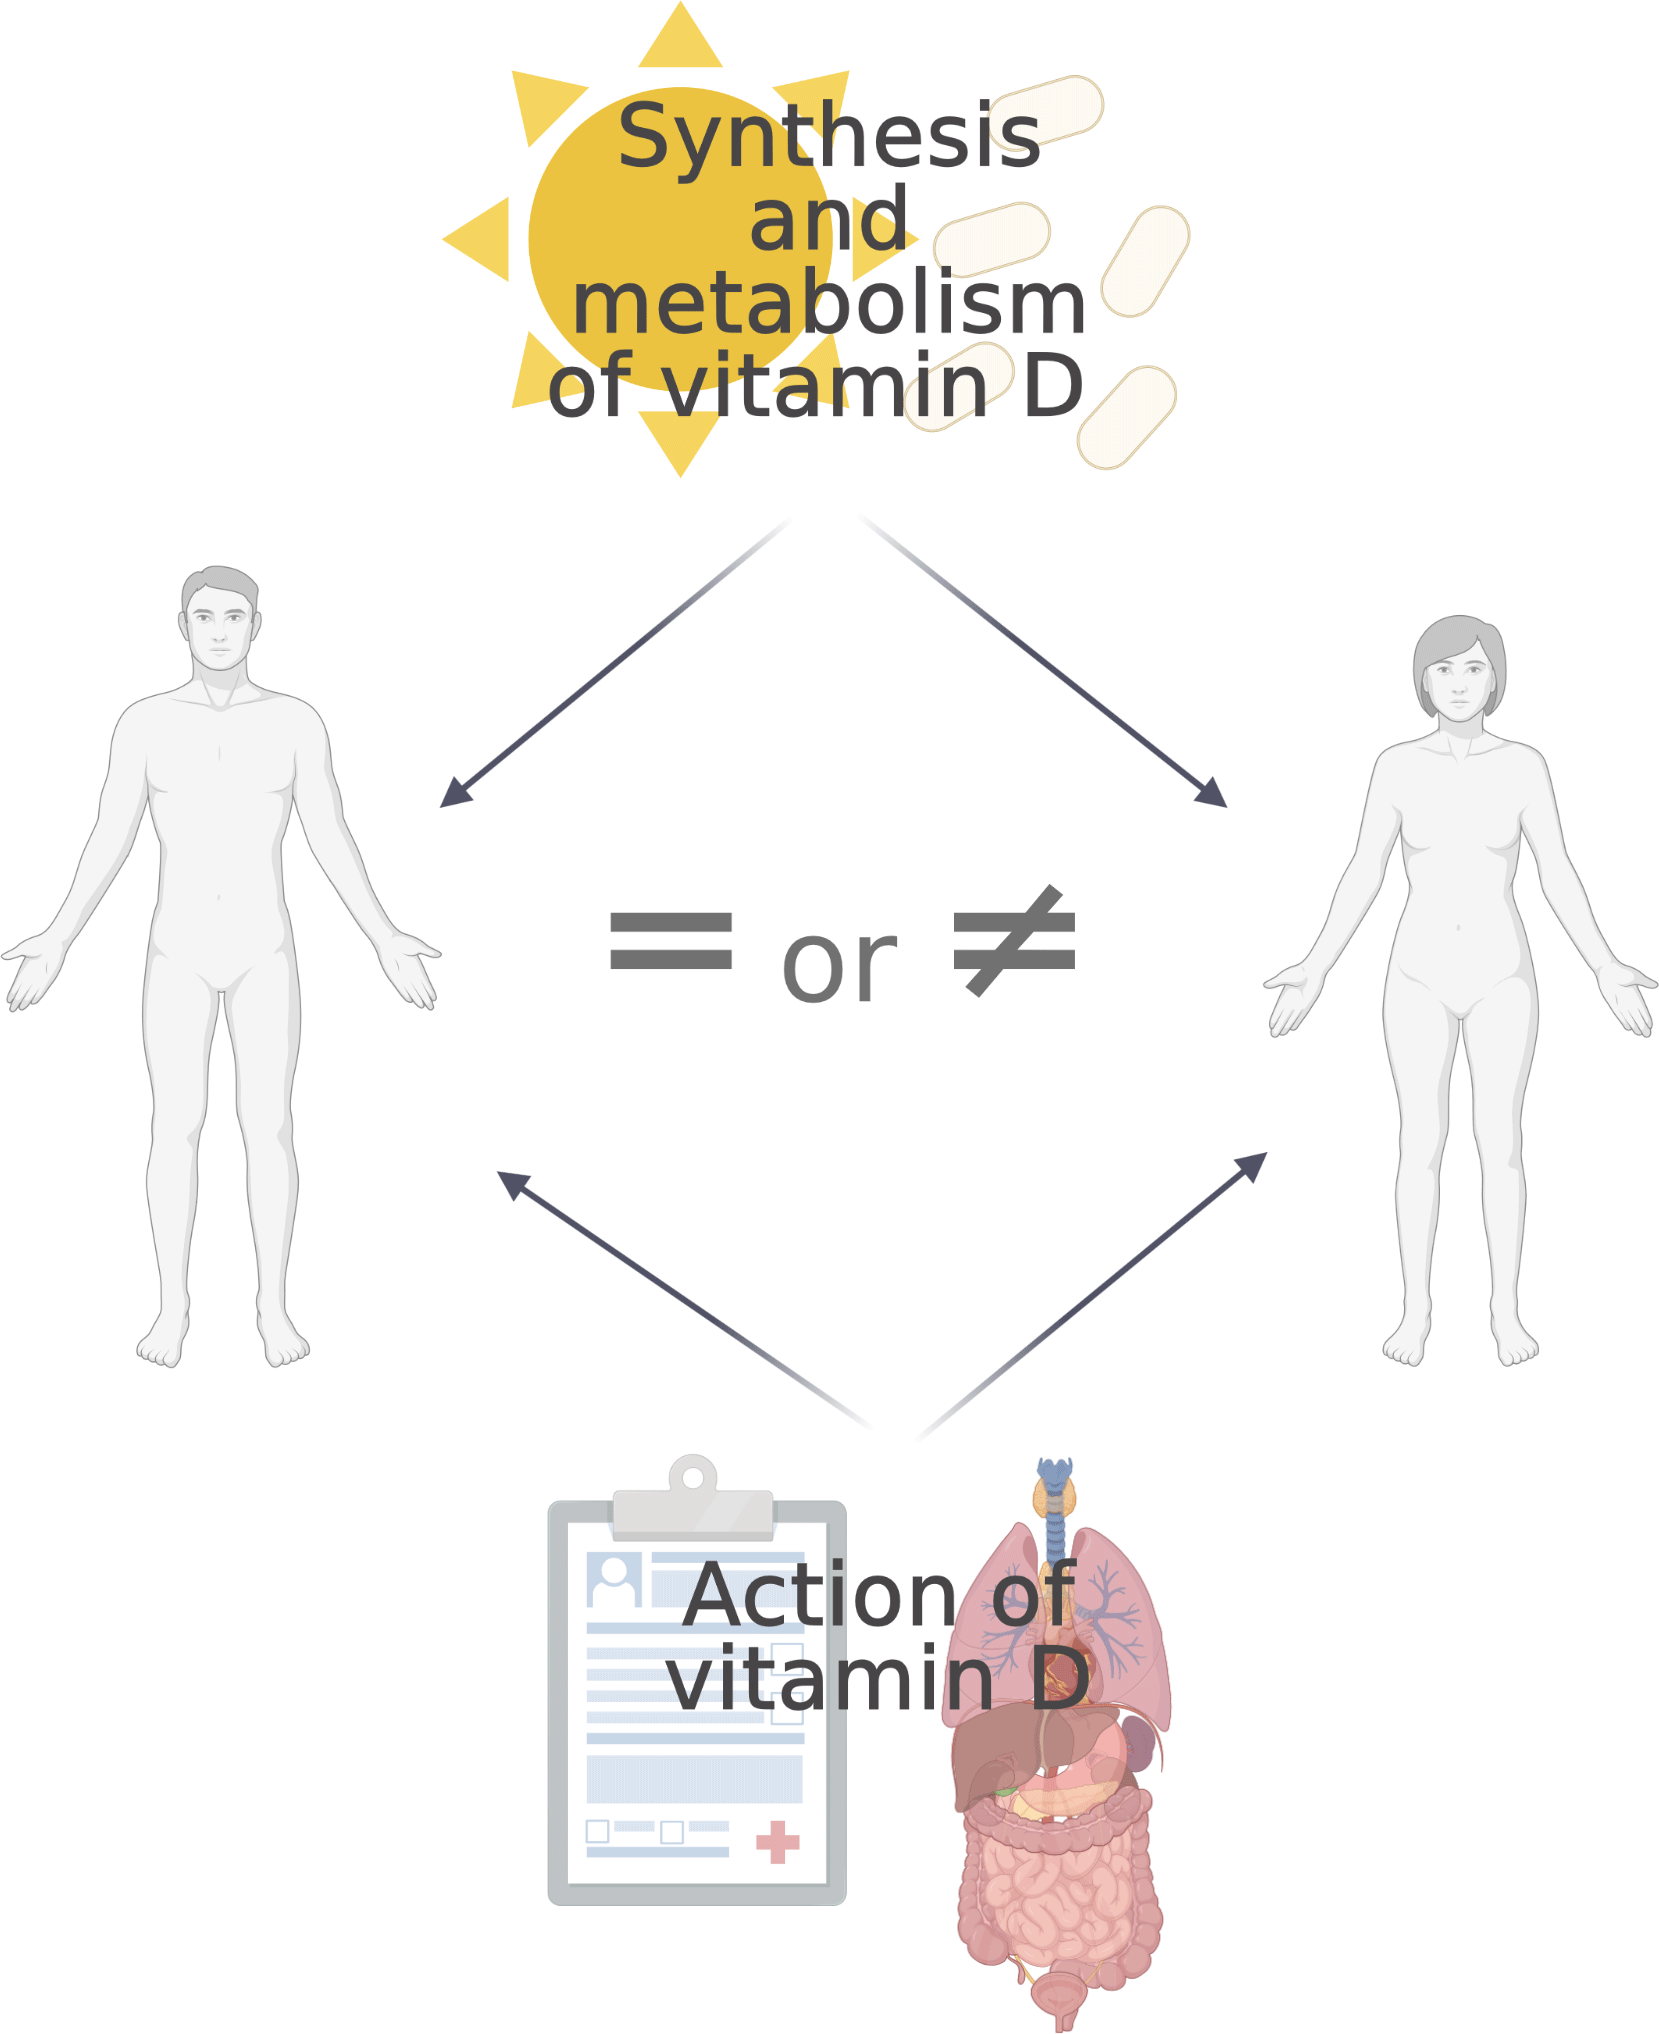 Sex differences in vitamin D metabolism, serum levels and action